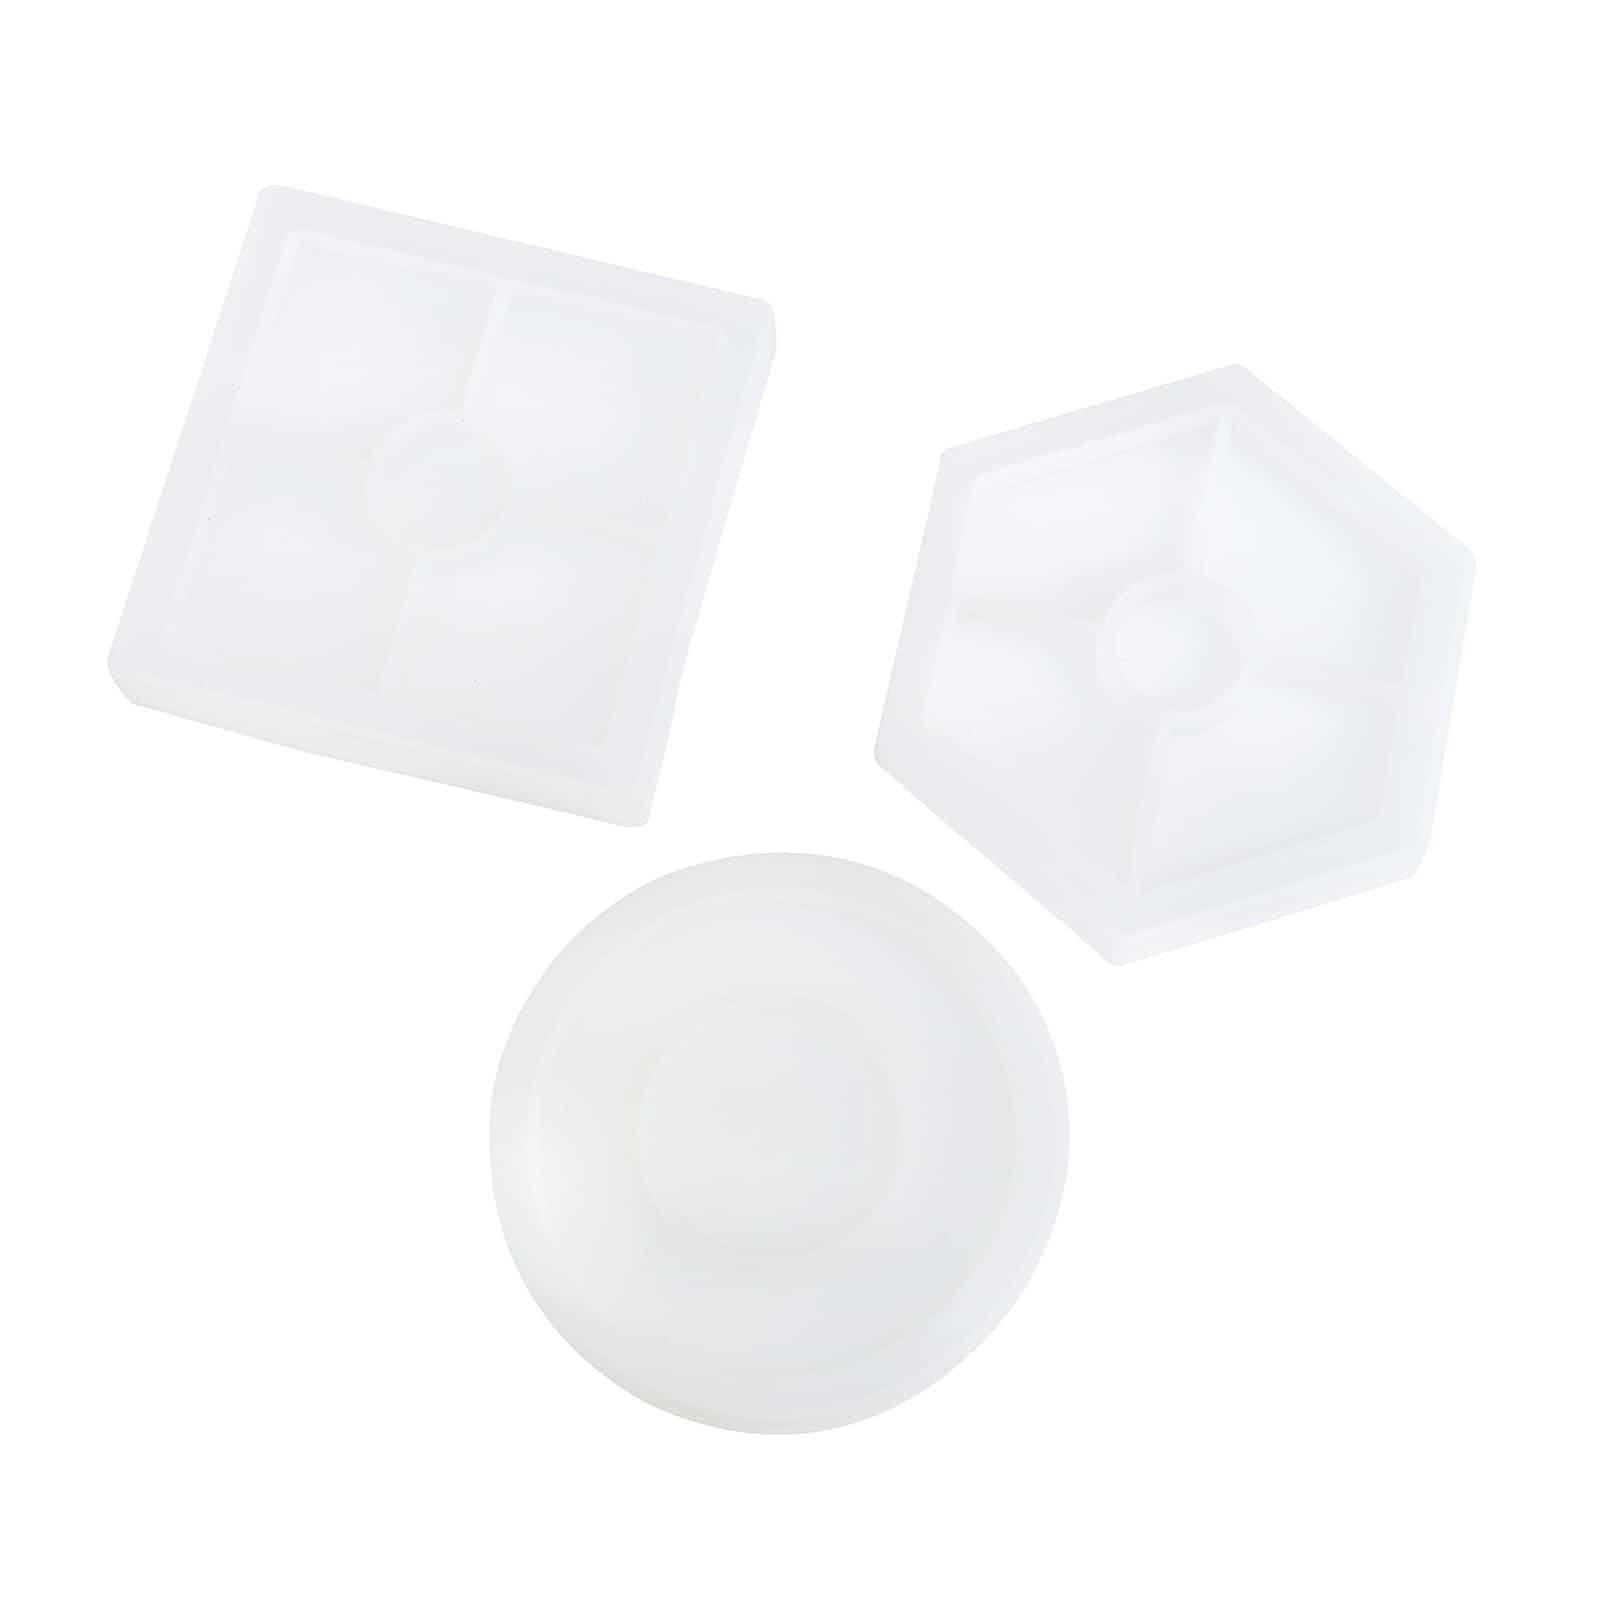 12 Packs: 3 ct. (36 total) We R Memory Keepers® Spin It™ Silicone Coaster  Molds